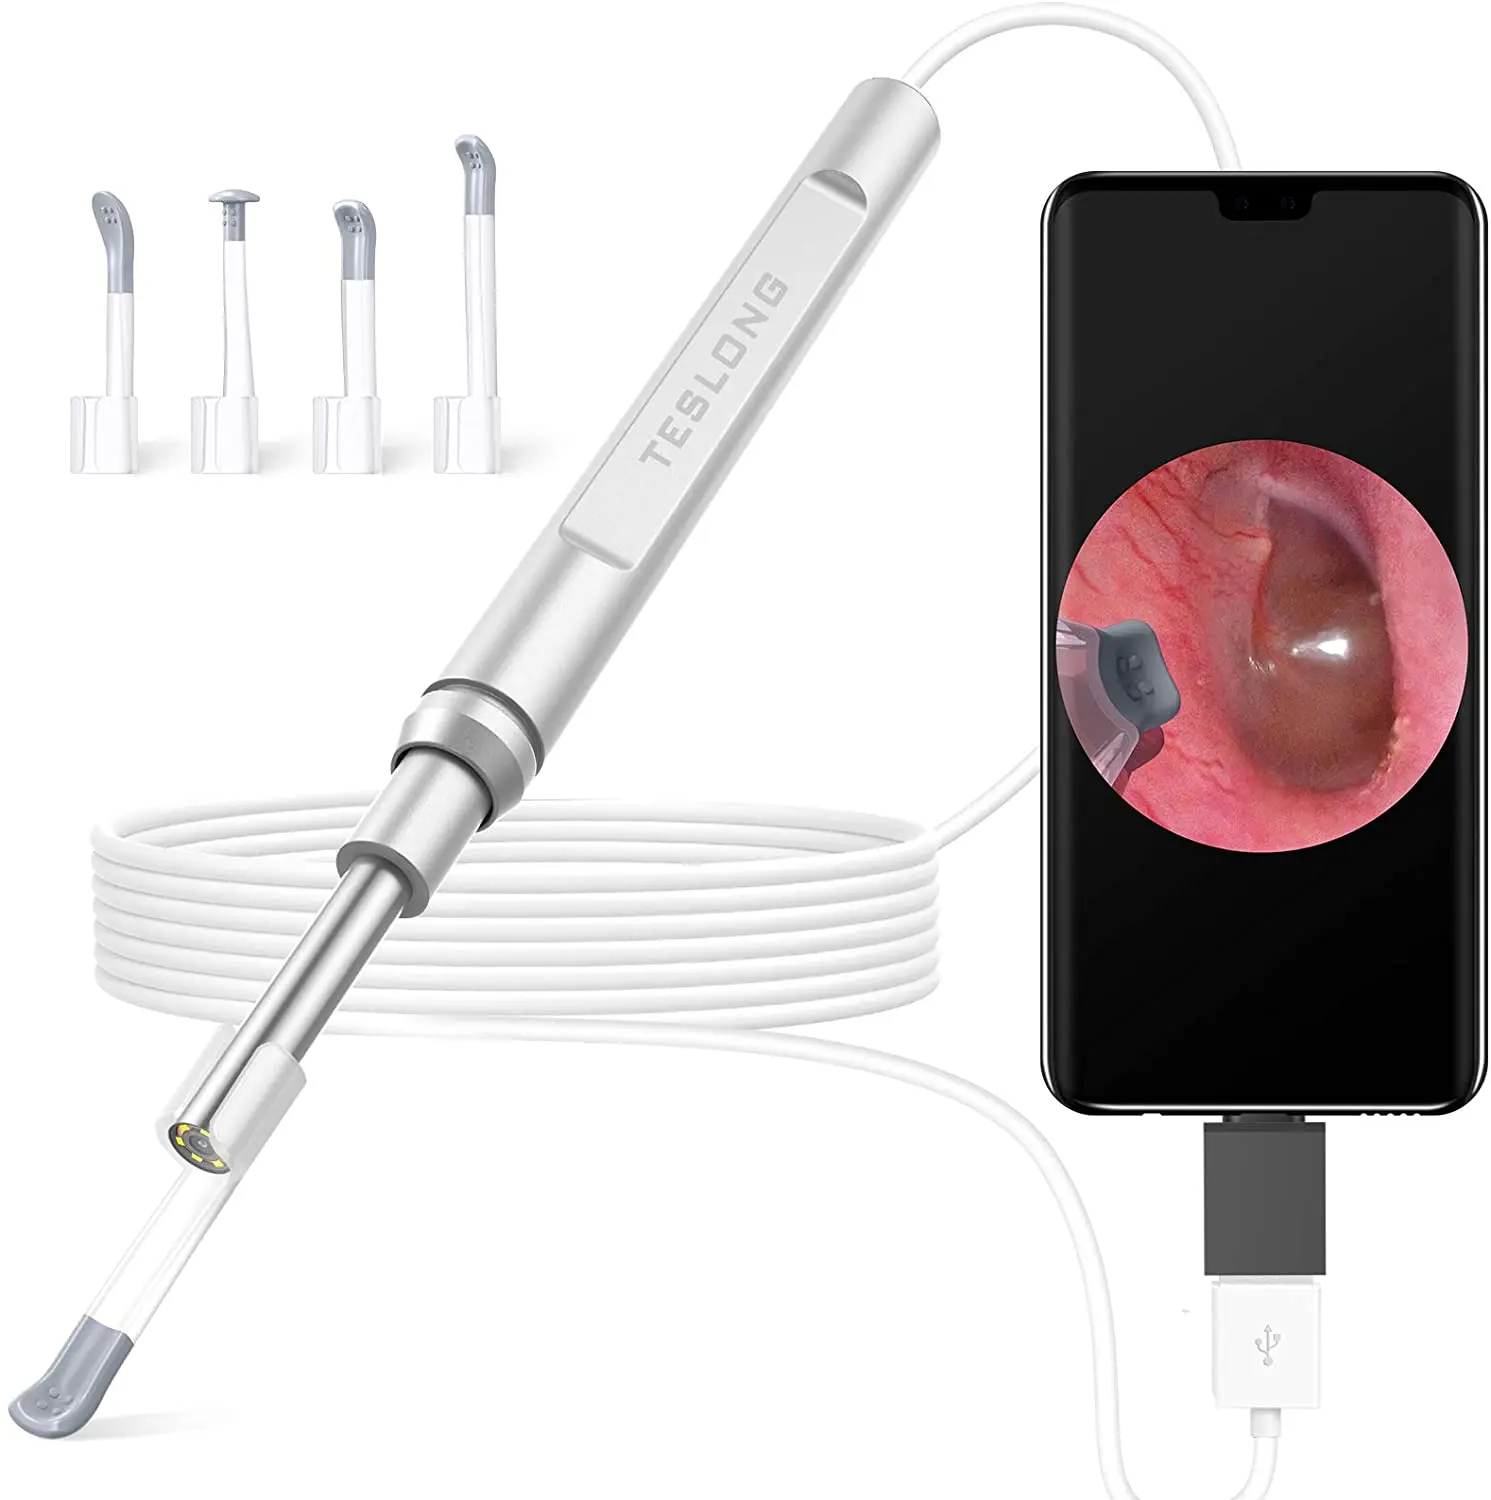 

Hottest selling smart visual ear cleaner USB ear wax remover with 3.9mm endoscope camera